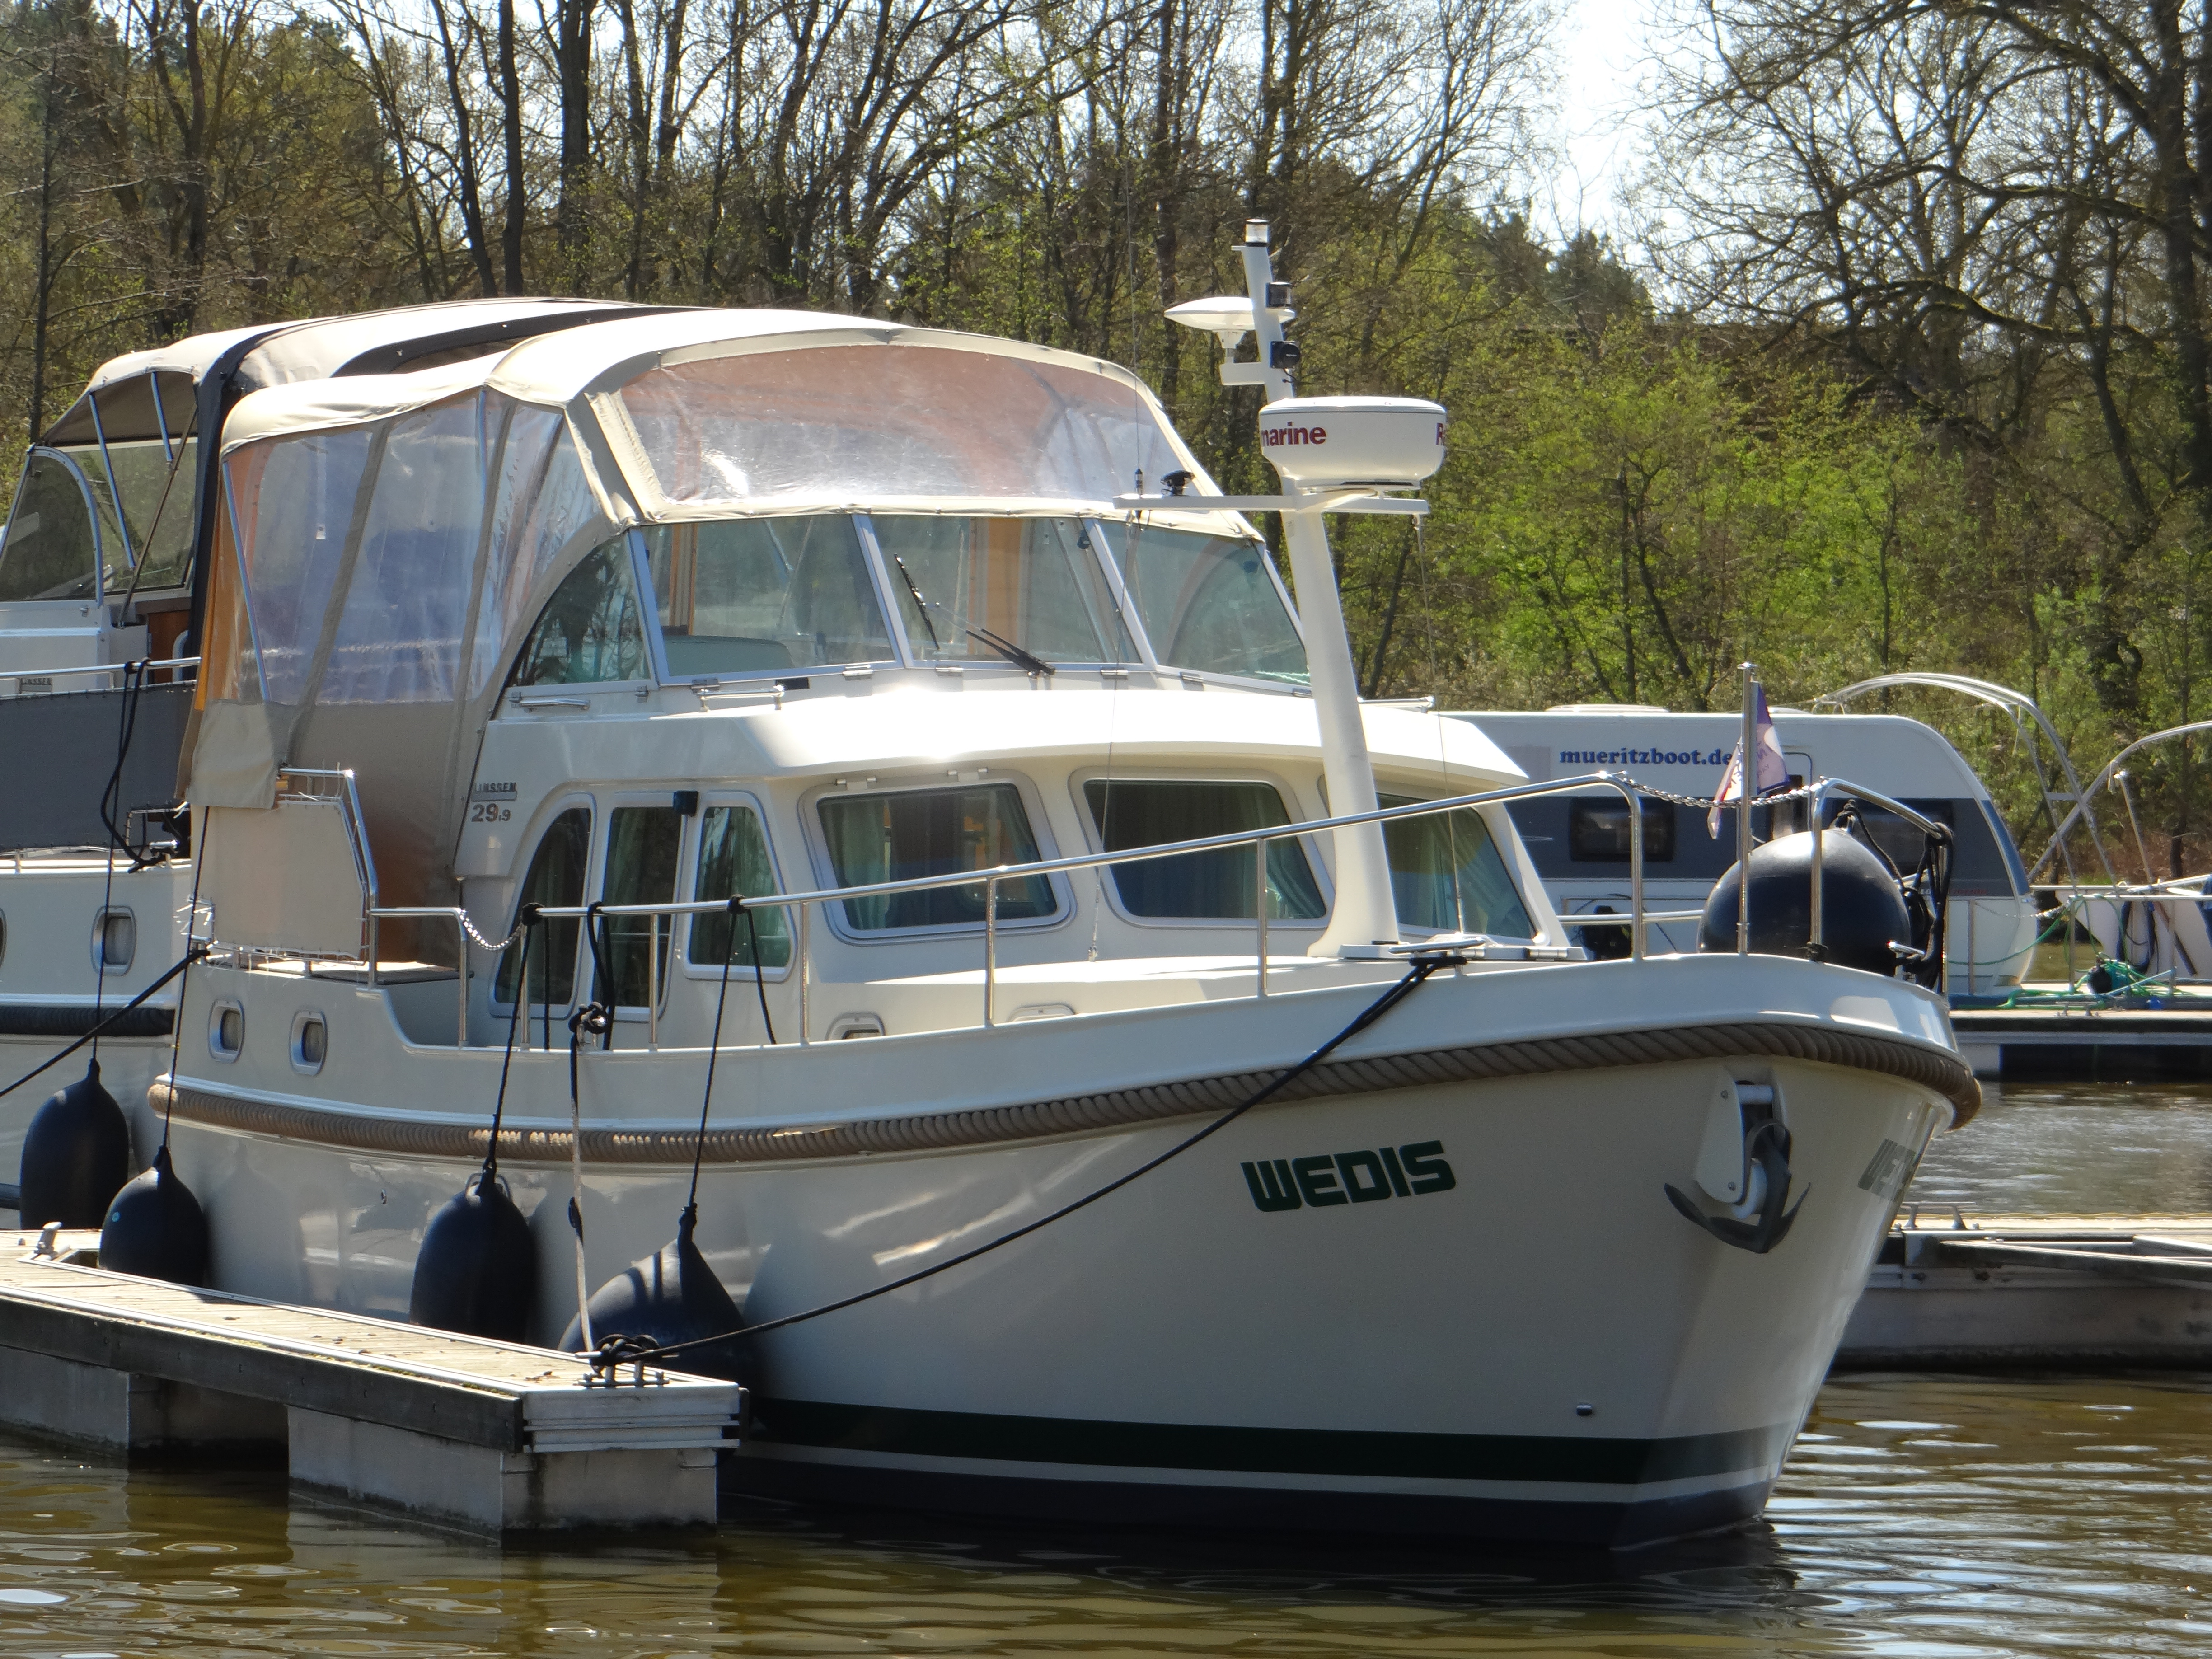 Linssen Grand Sturdy 29.9 AC - Motor Boat Charter Germany & Boat hire in Germany Mirow Jachthafen Mirow 2